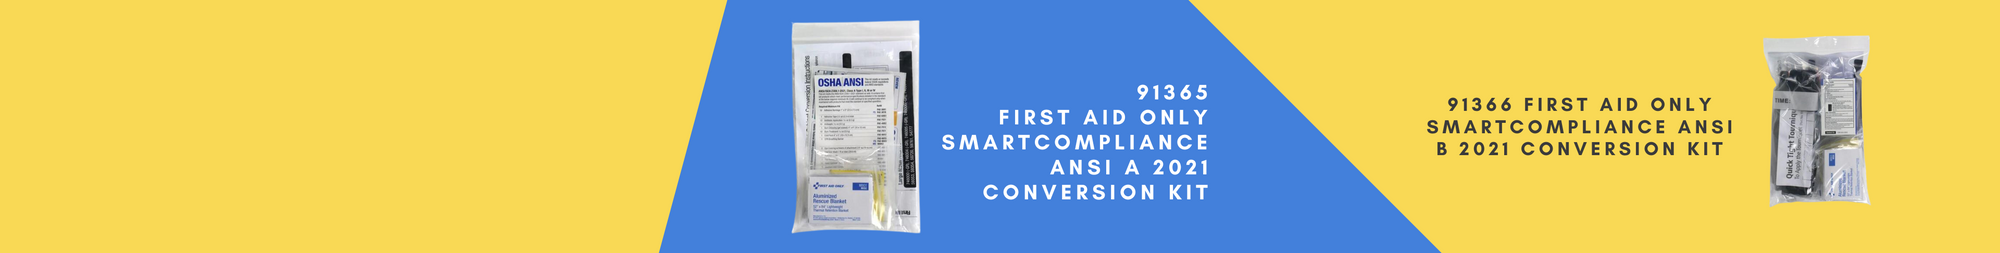 First Aid Only Conversion Kit